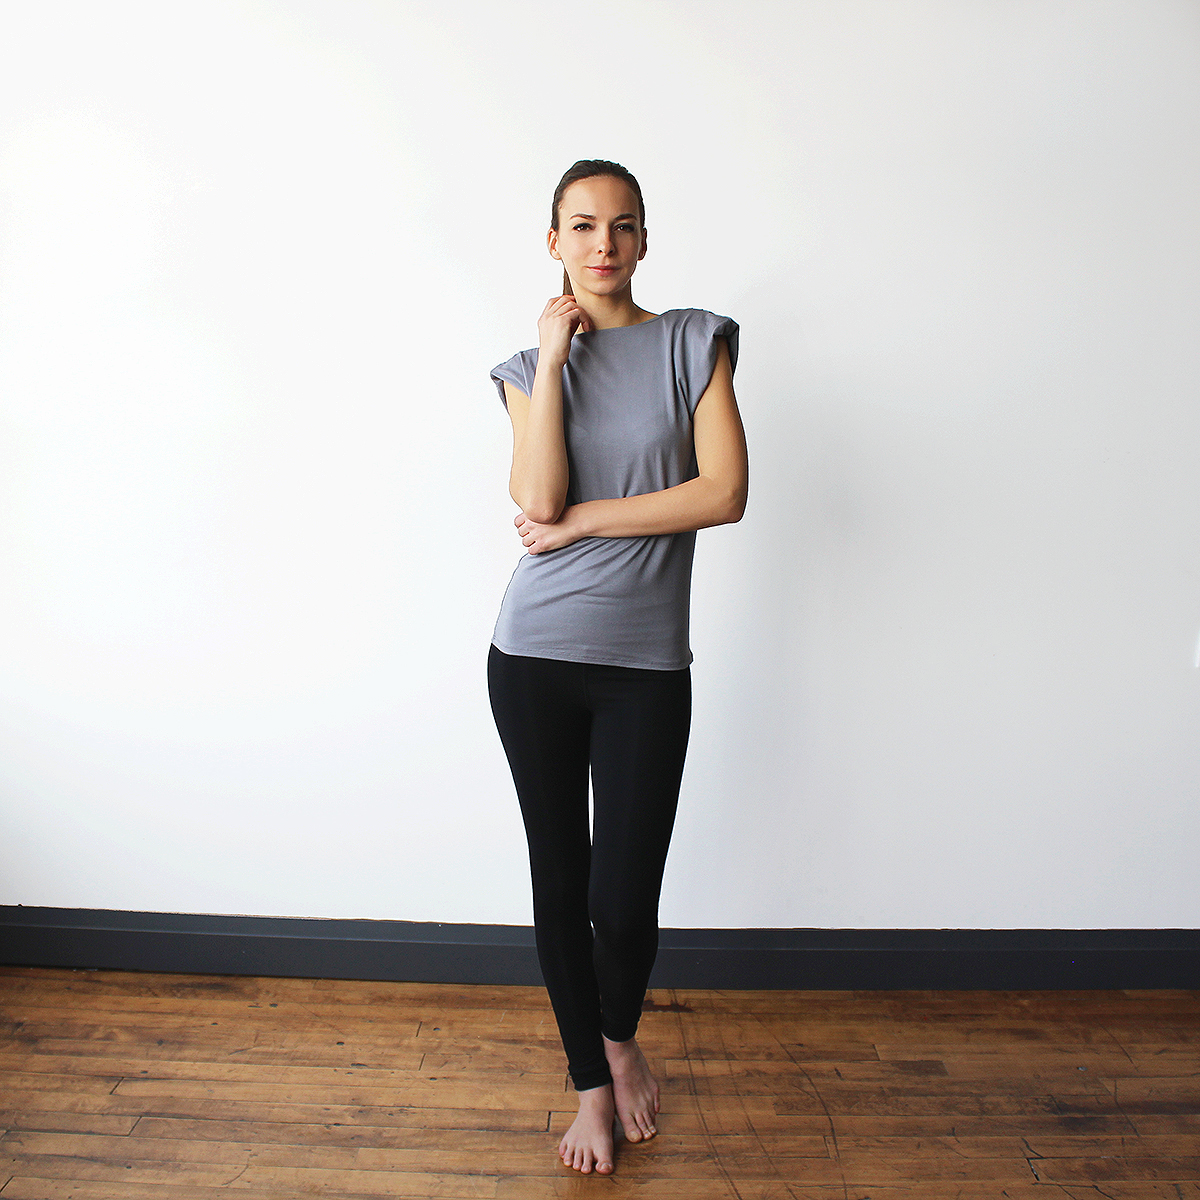 Sustainable Fabrics - Interview with Kristi Soomer of Encircled featured by popular Los Angeles fashion blogger, Nomad Moda